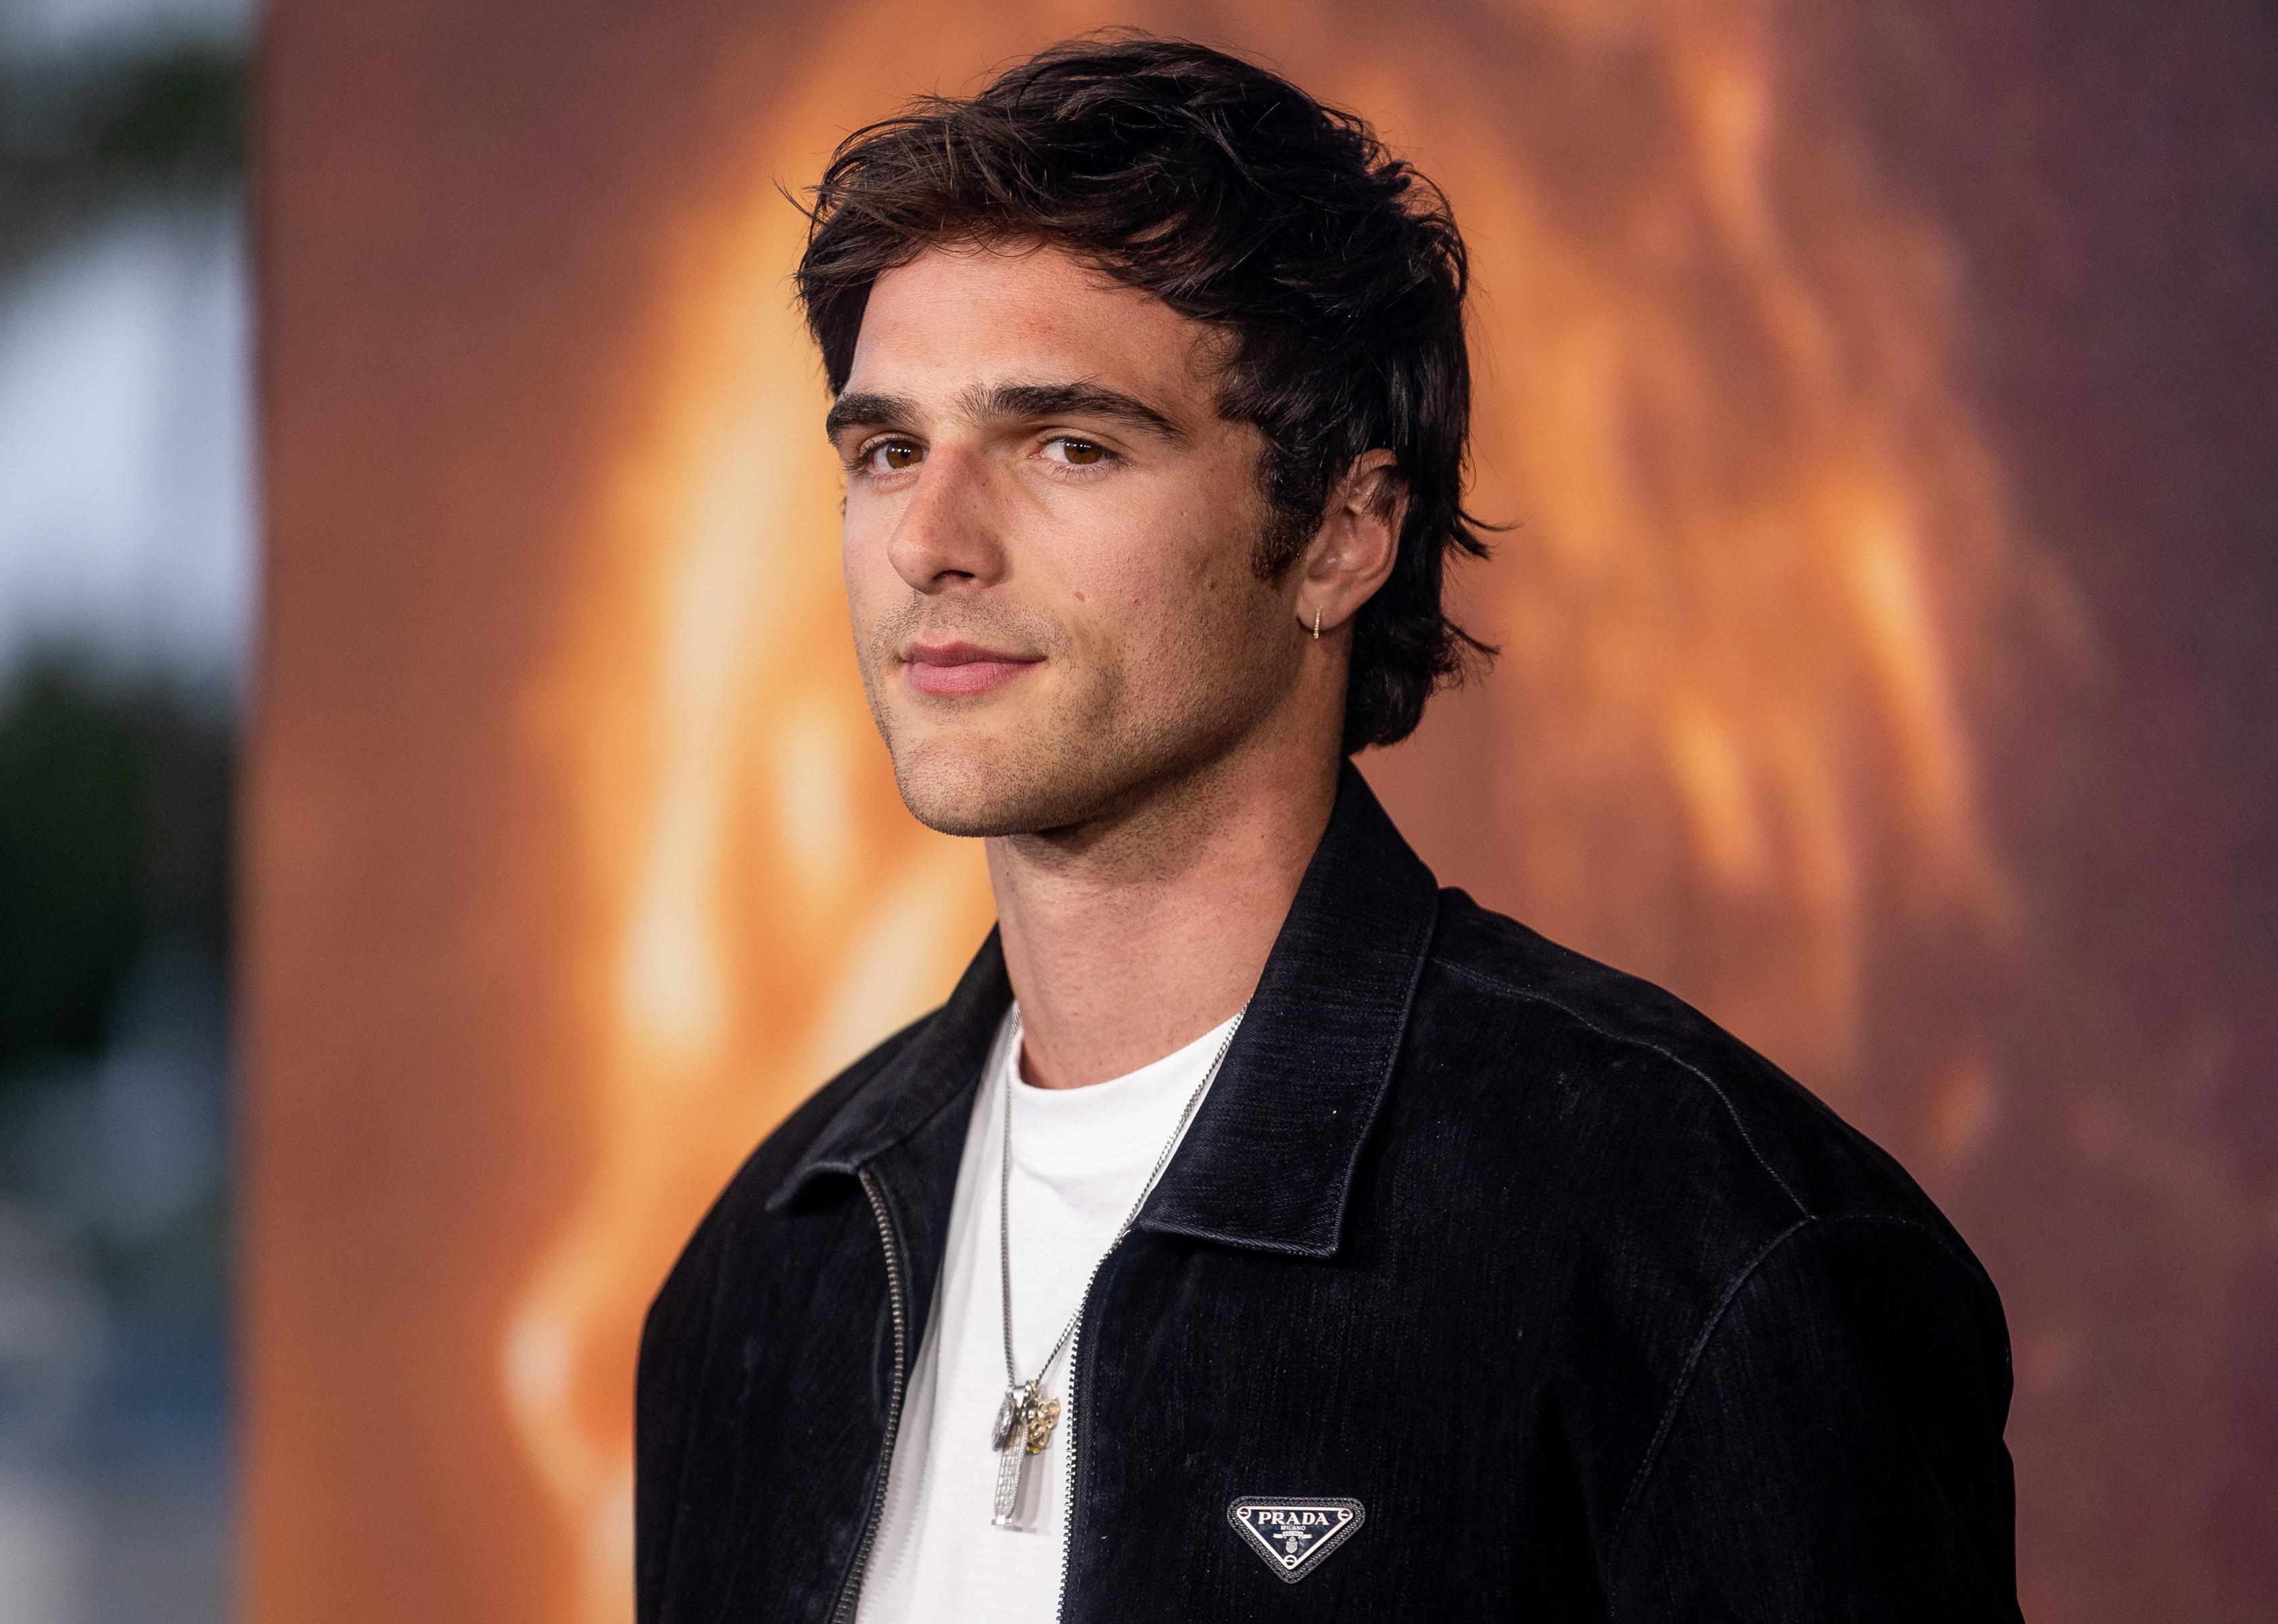 Jacob Elordi attends the HBO Max FYC event for 'Euphoria' at Academy Museum of Motion Pictures.